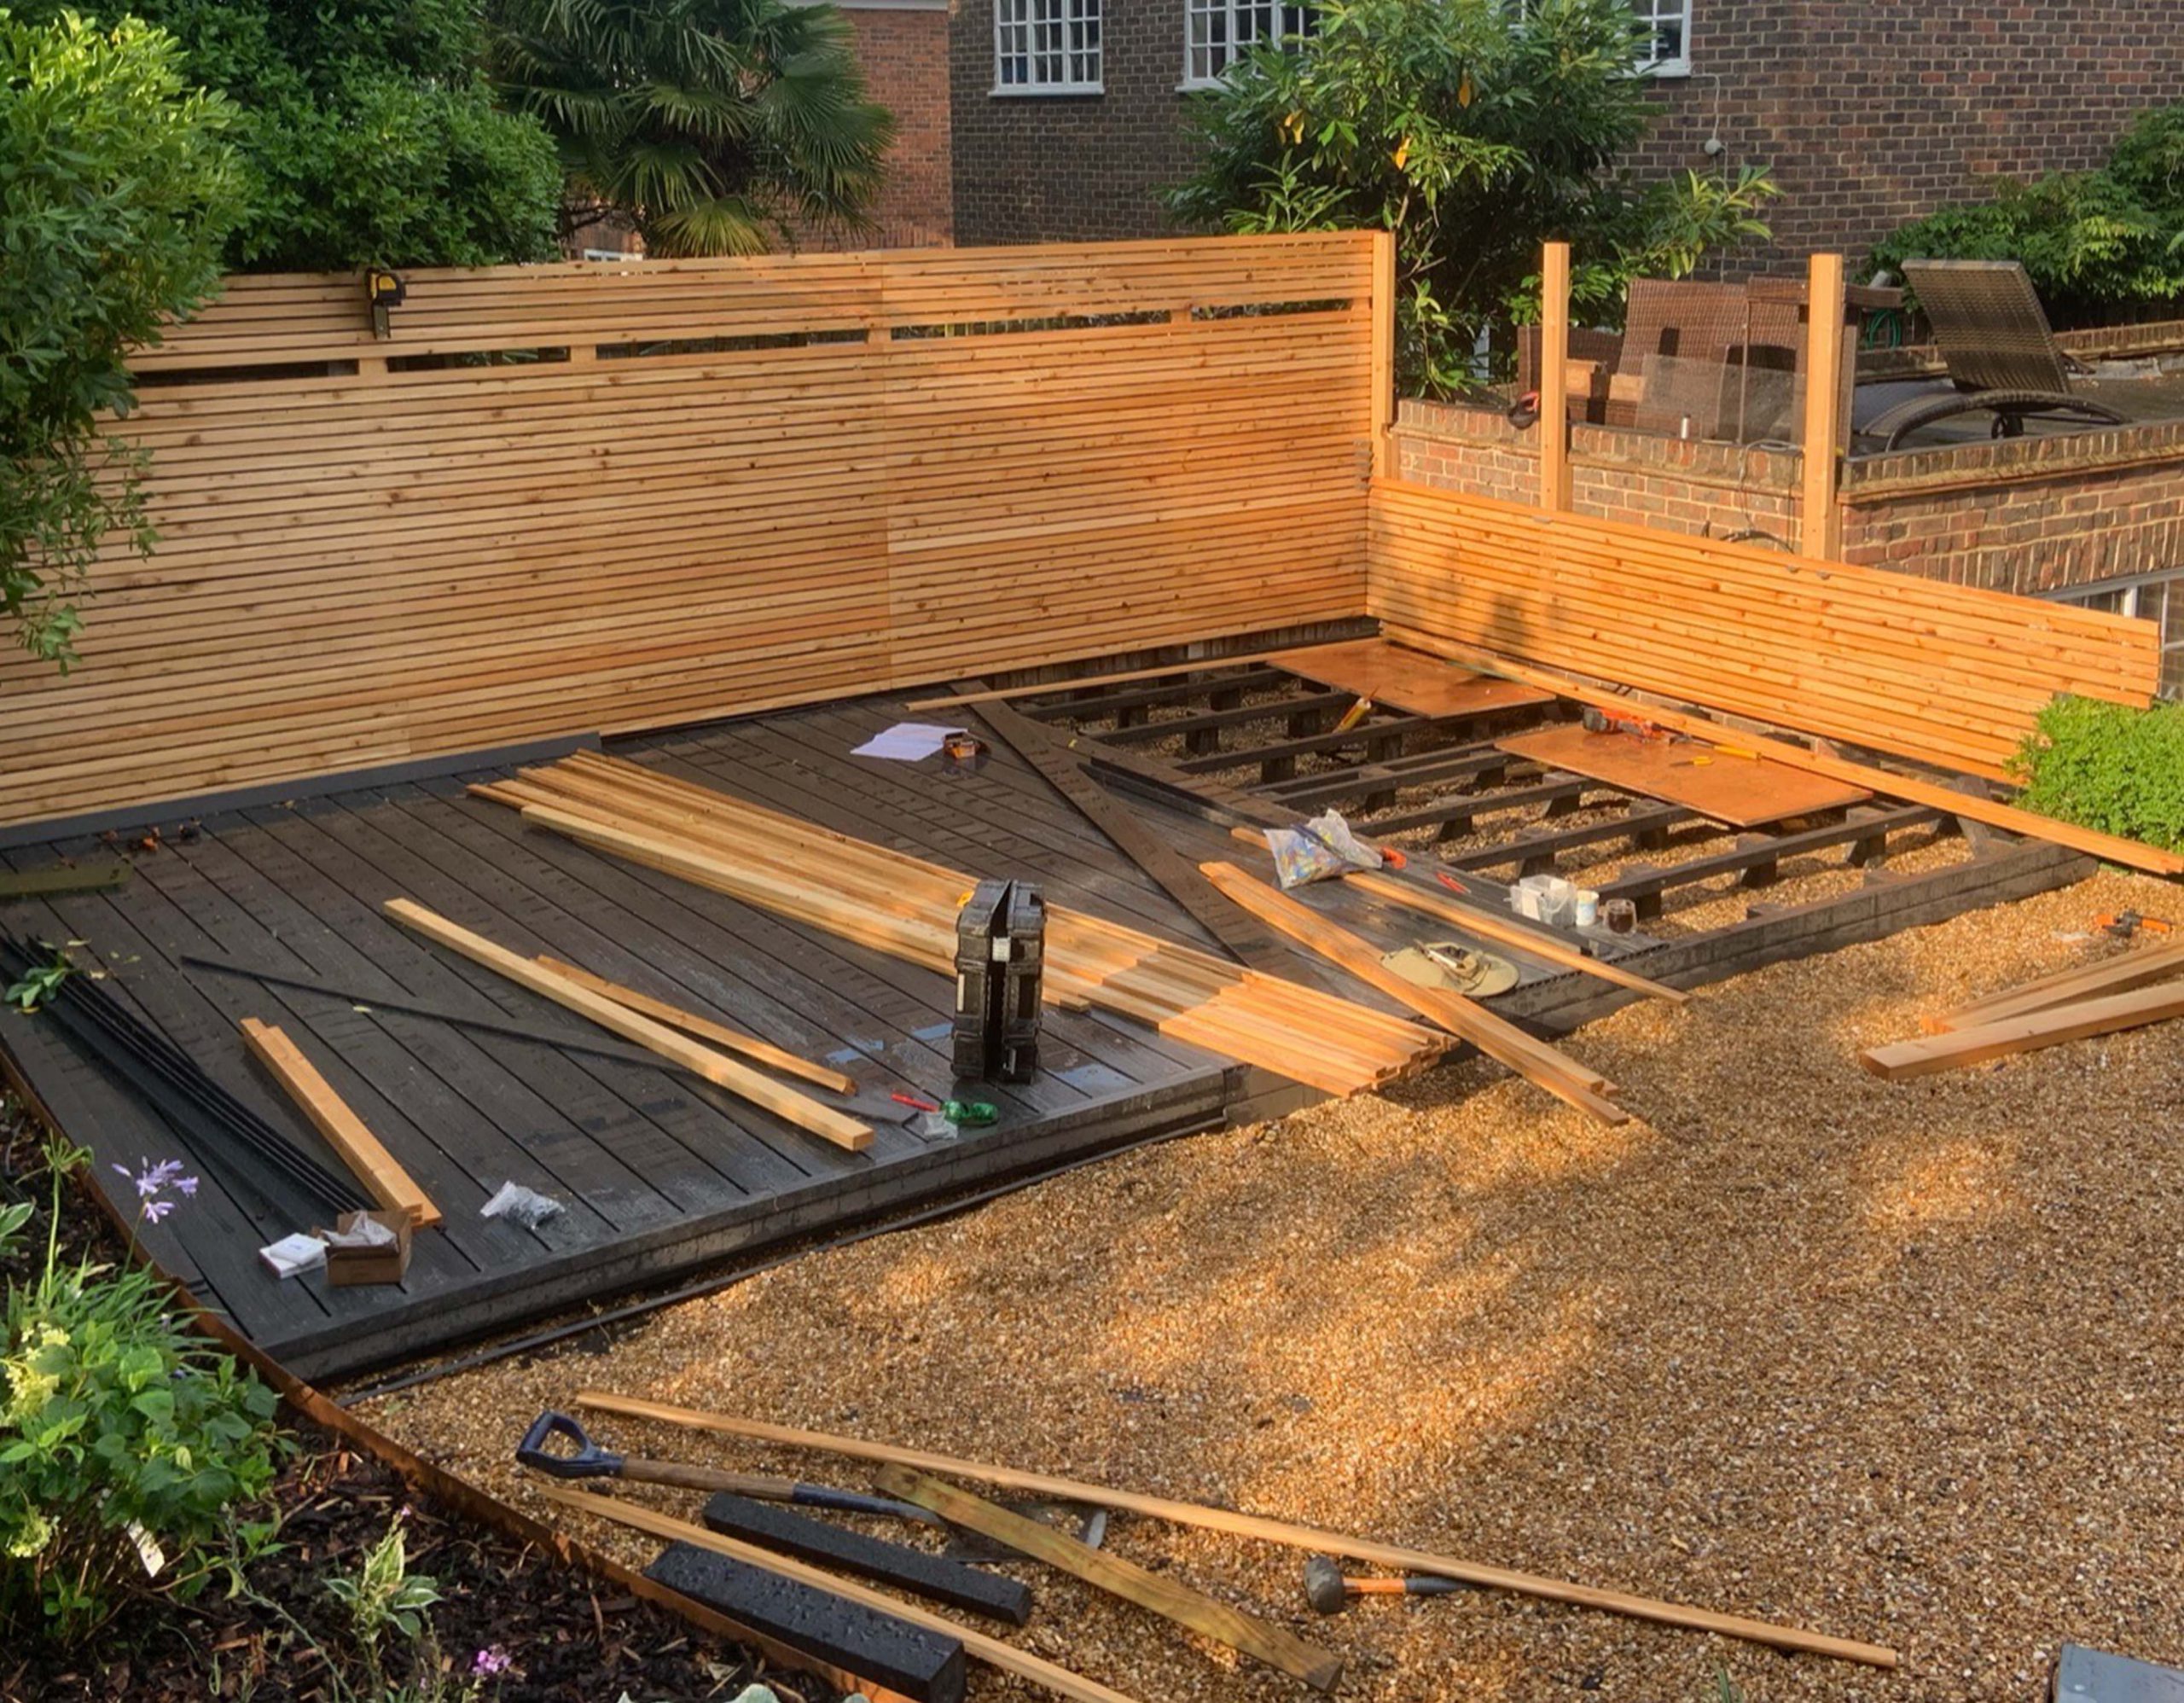 Sustainable decking being installed